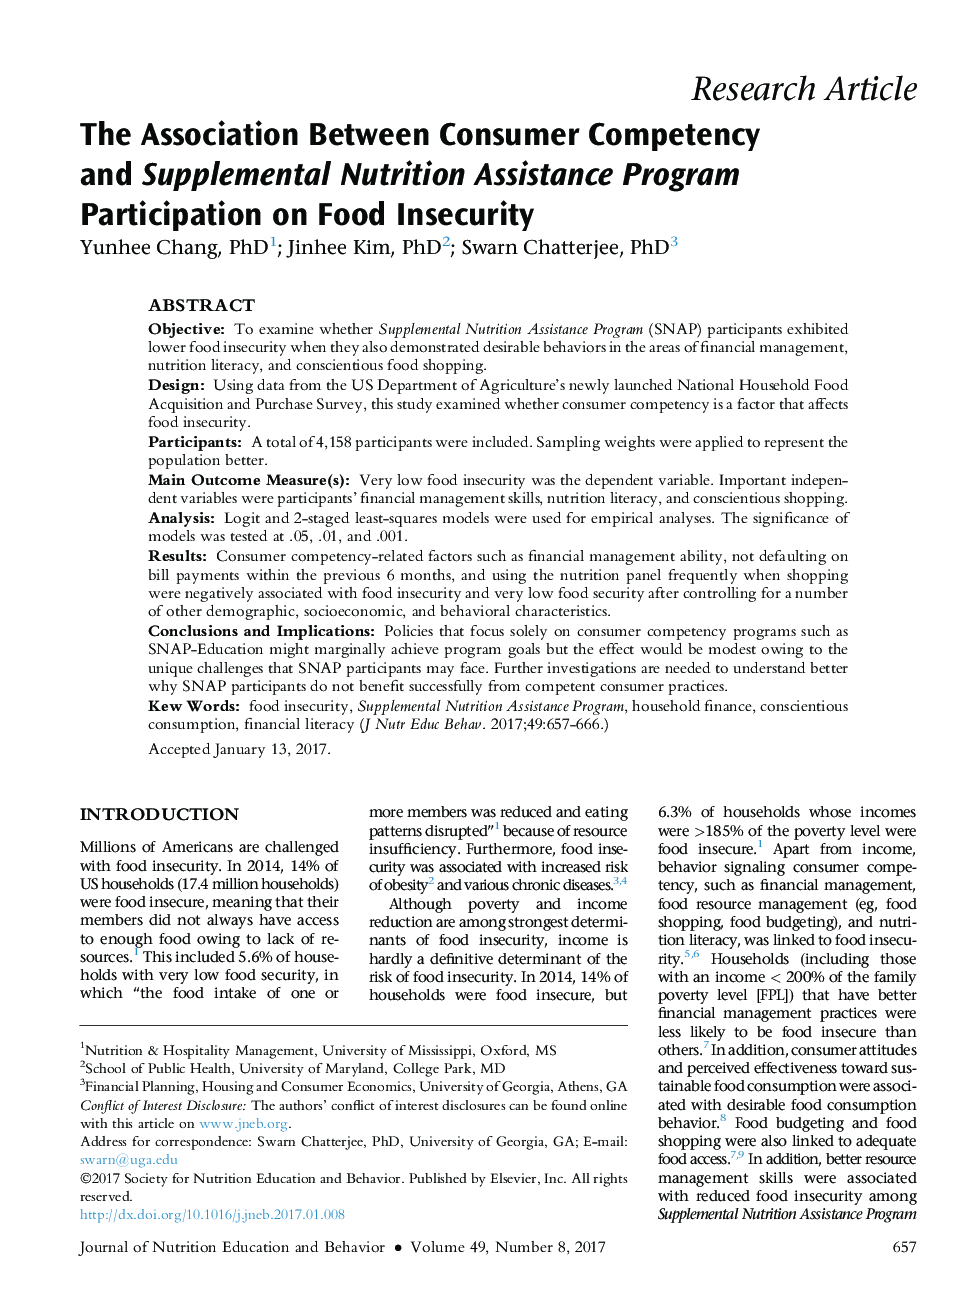 The Association Between Consumer Competency and Supplemental Nutrition Assistance Program Participation on Food Insecurity